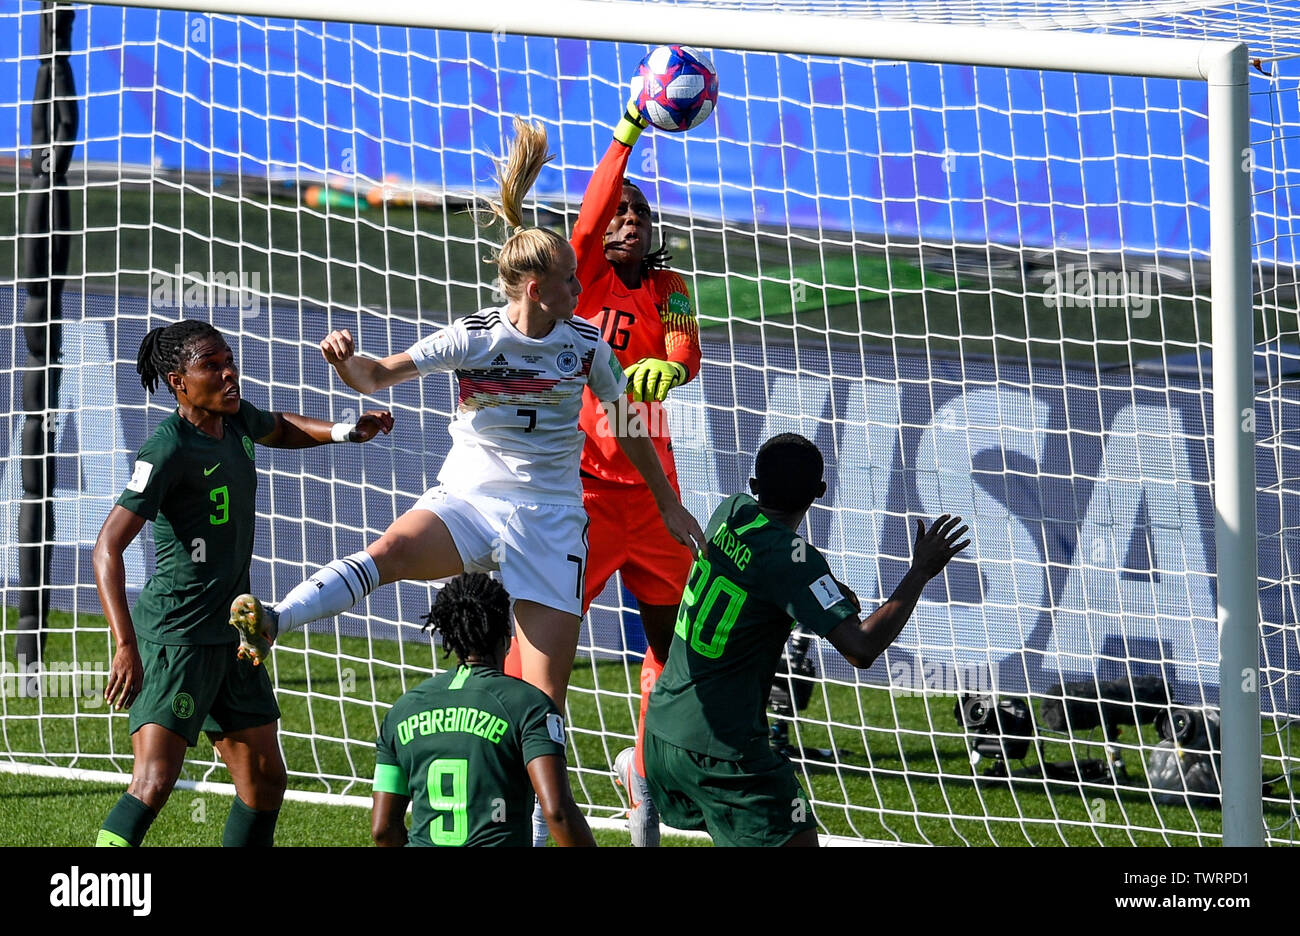 Grenoble, France. 22nd June, 2019. Goalkeeper Chiamaka Nnadozie of Nigeria (Top) makes a save during the round of 16 match against Germany at the 2019 FIFA Women's World Cup at Stade des Alpes in Grenoble, France, June 22, 2019. Credit: Mao Siqian/Xinhua/Alamy Live News Stock Photo